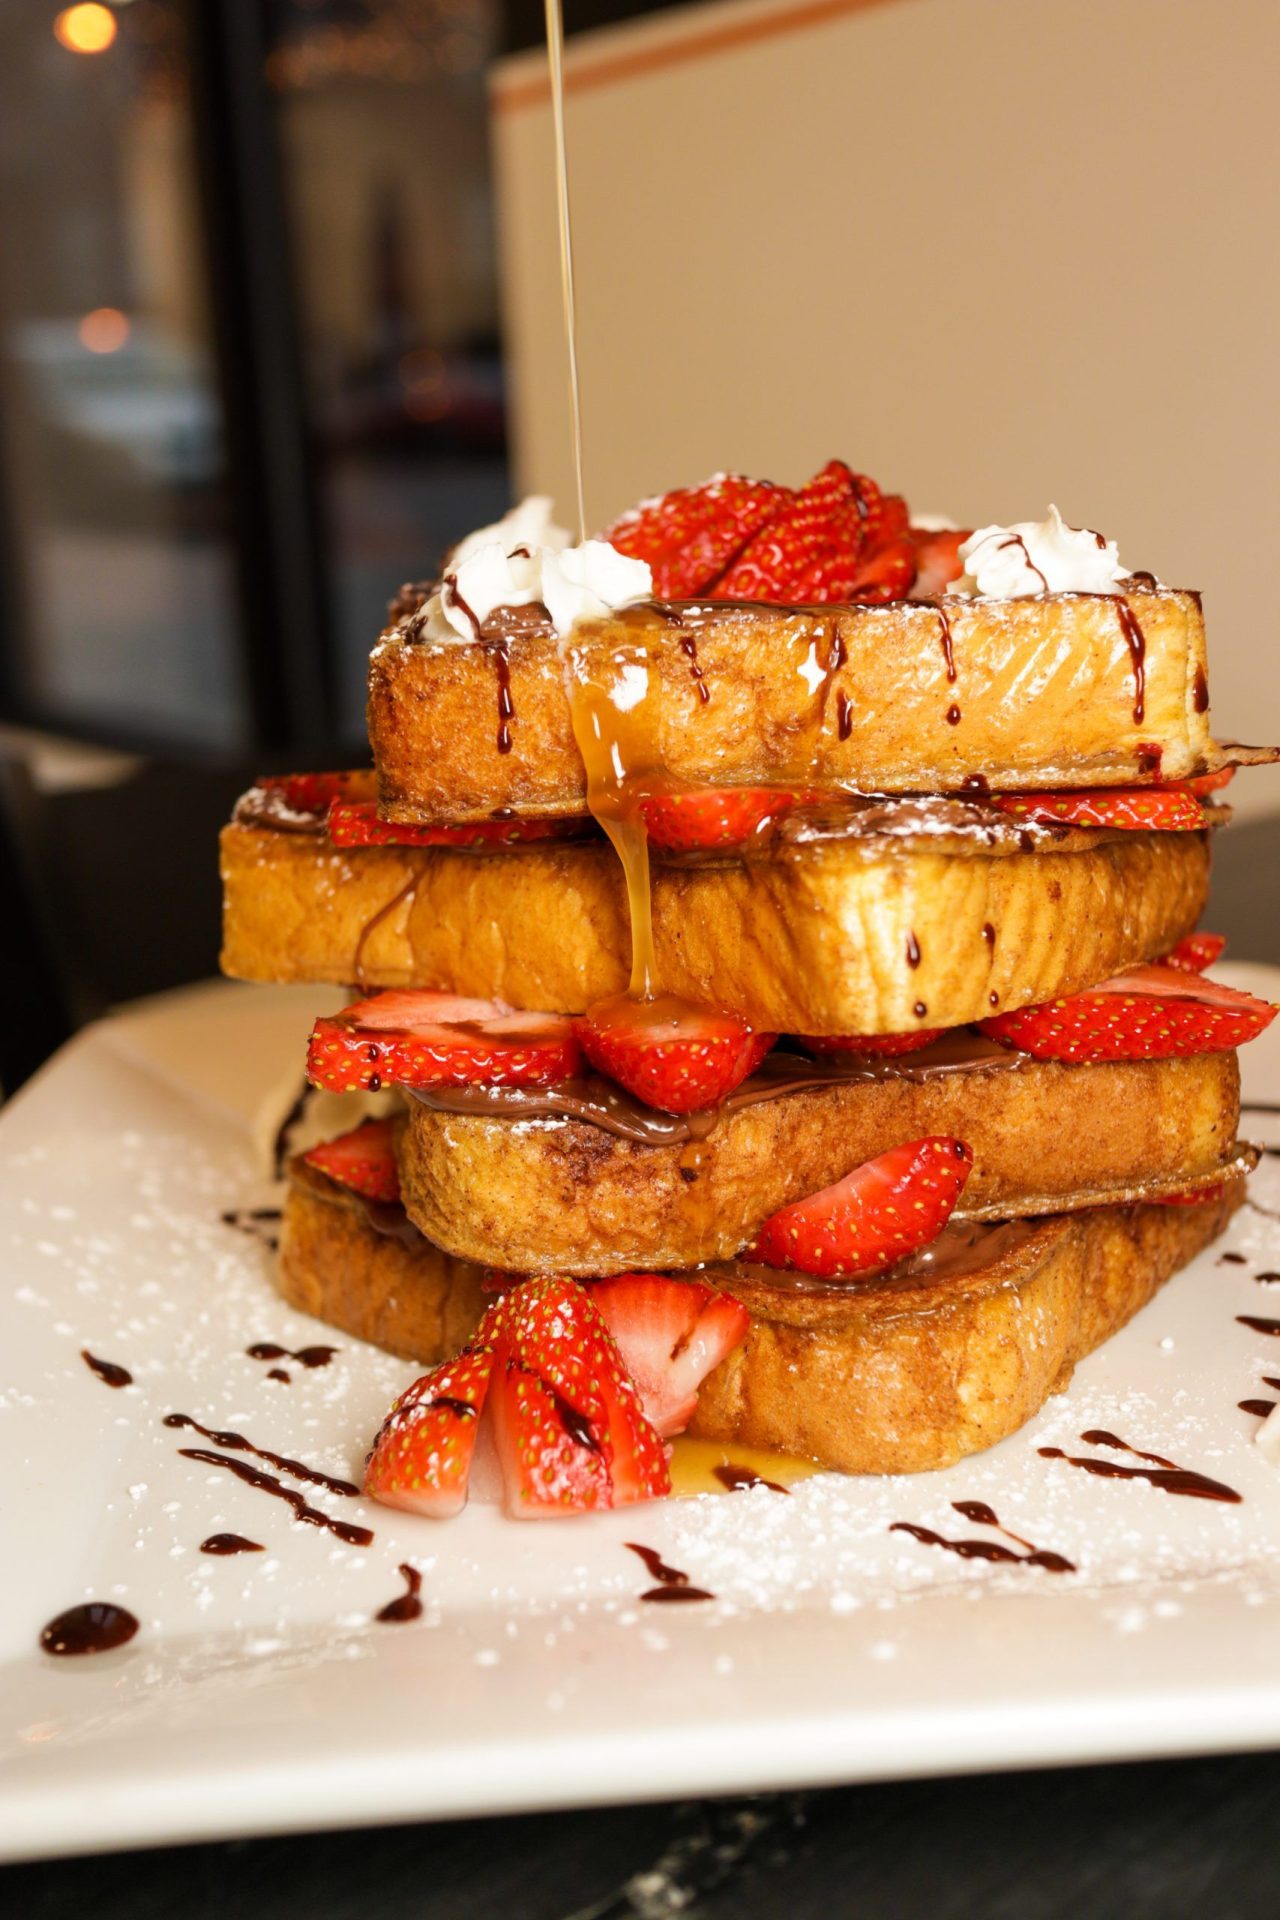 Charmed Restaurant's French Toast